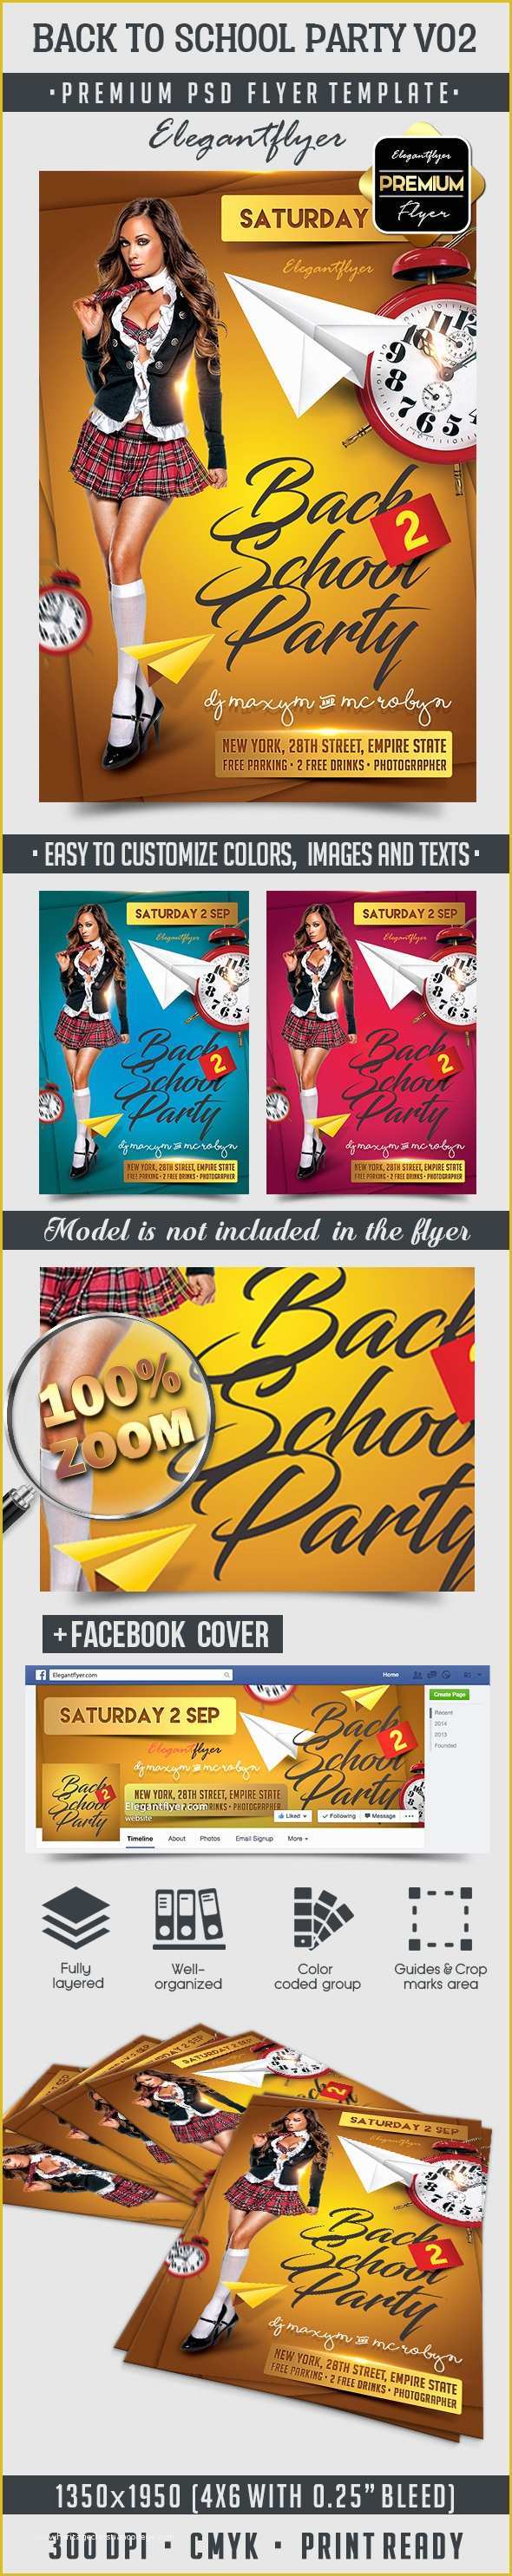 Back to School Party Flyer Template Free Of Back to School Party V02 – Flyer Psd Template – by